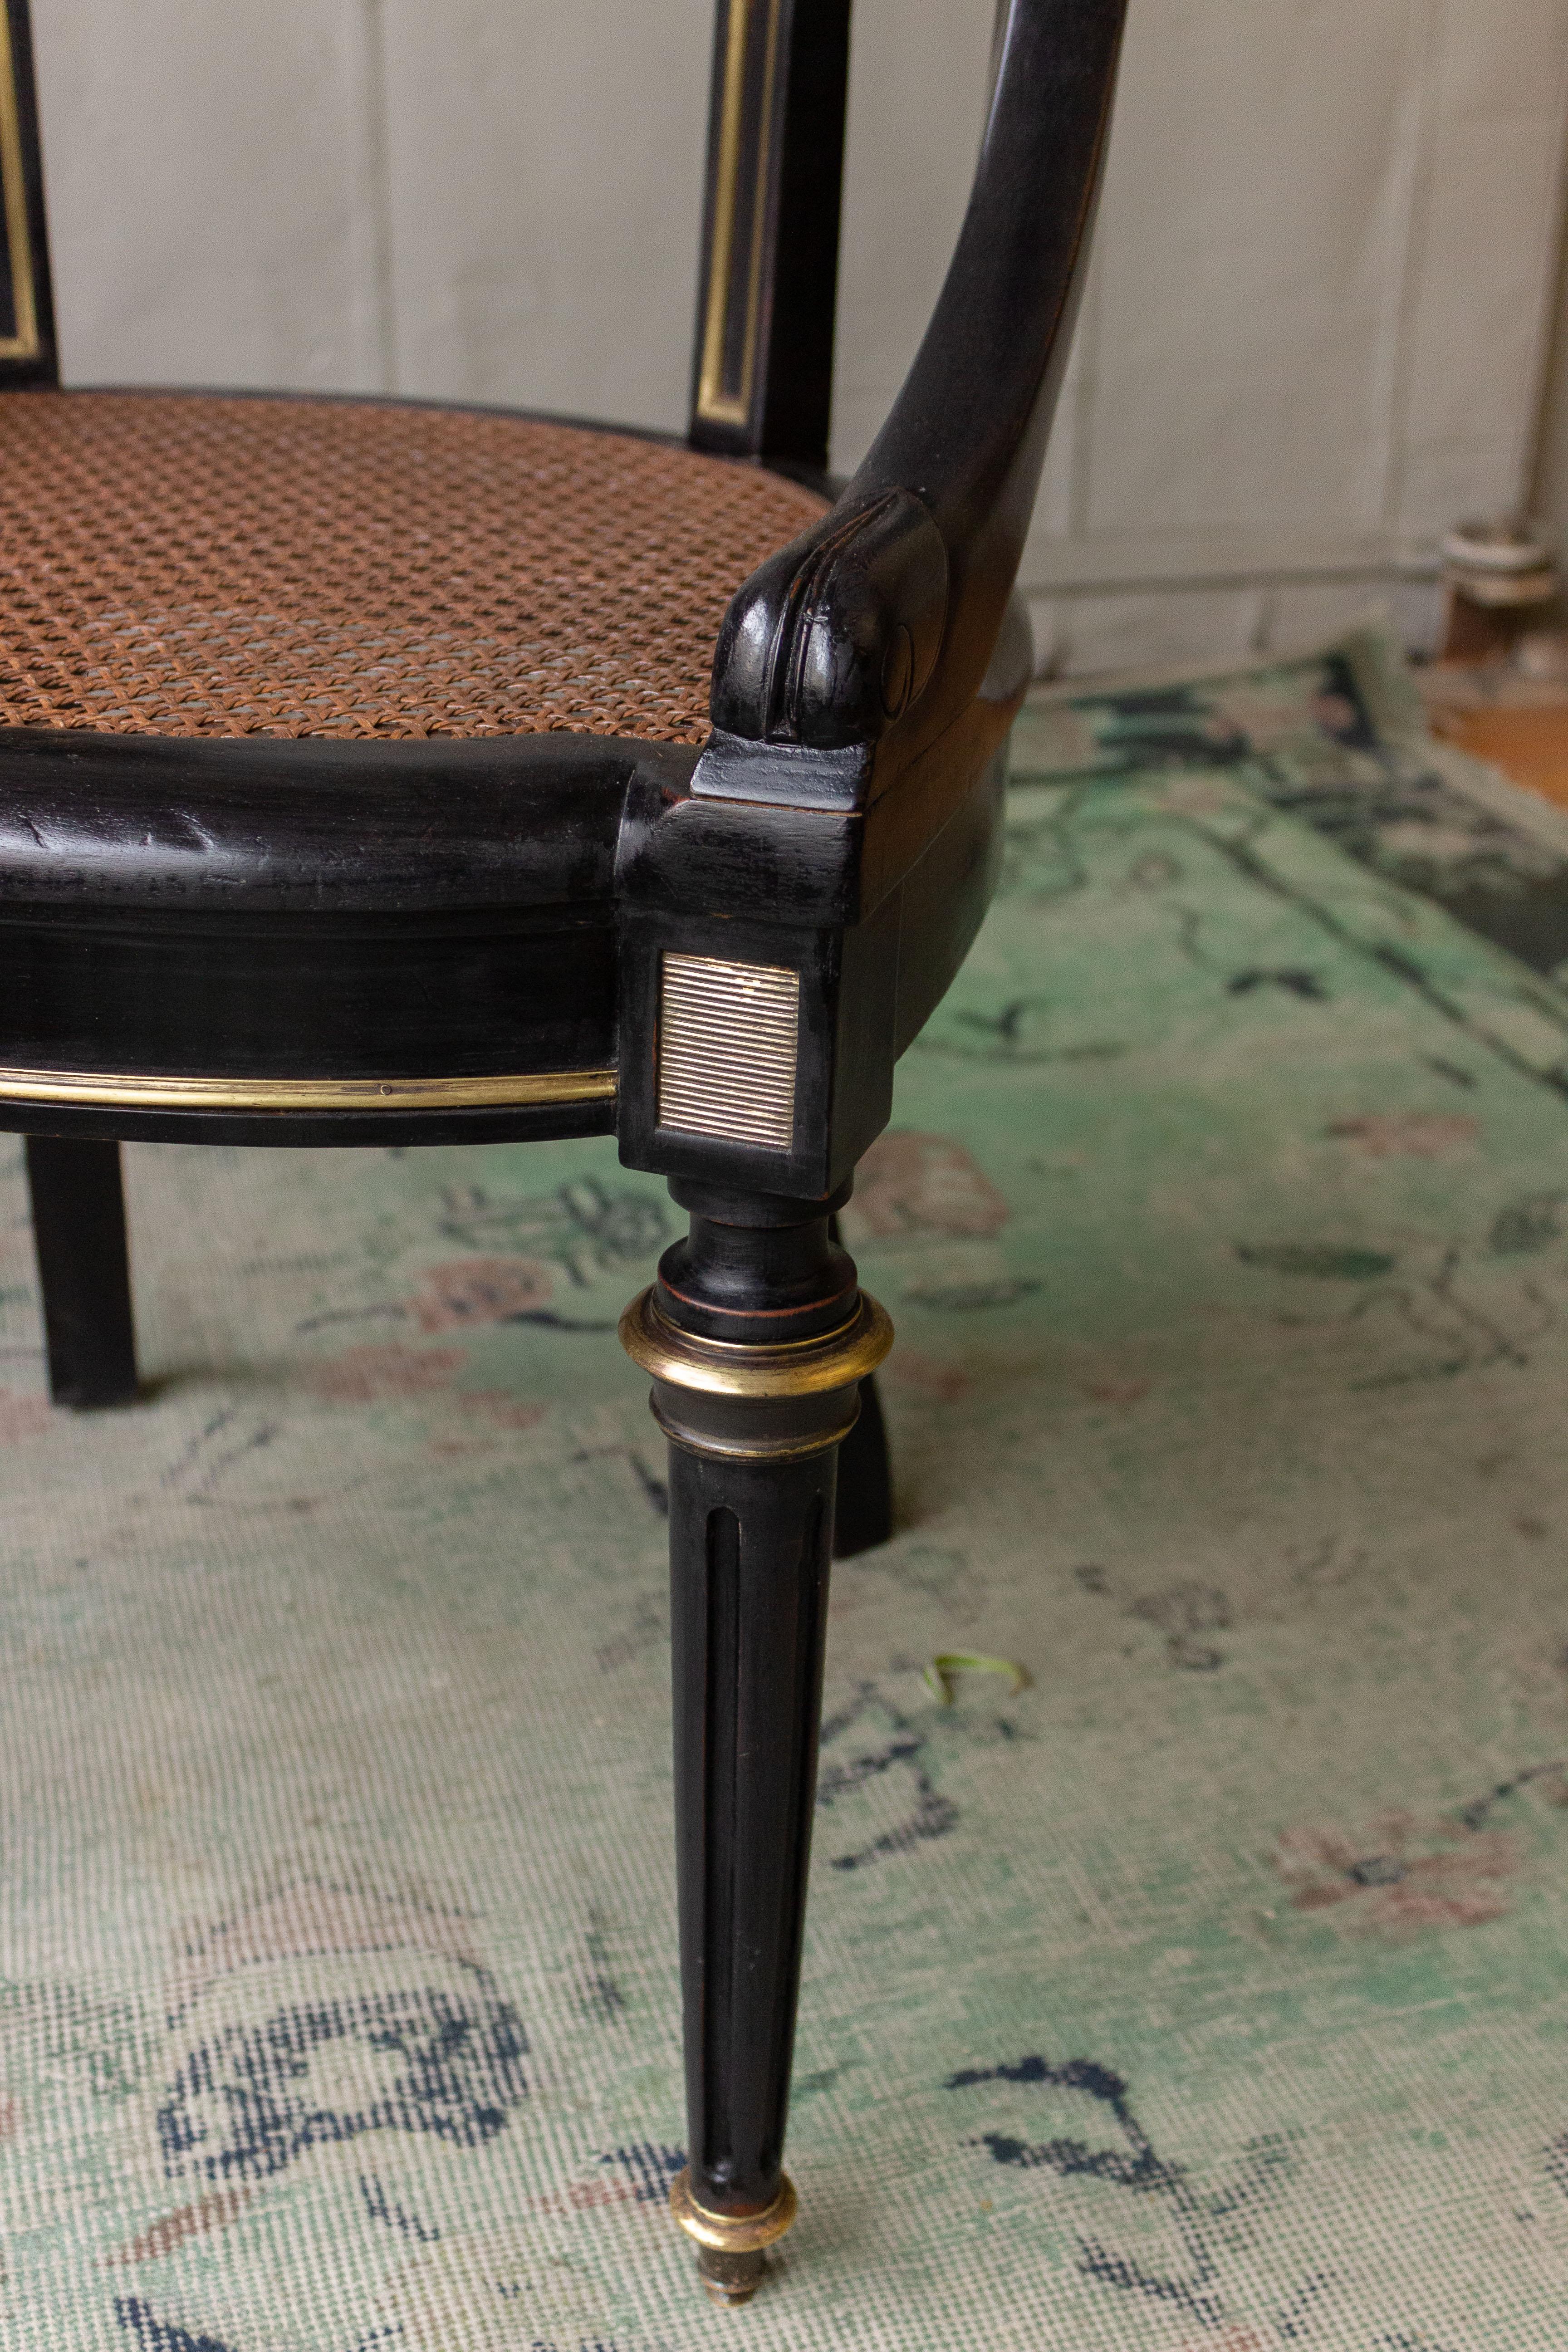 Ebonized armchair  with brass trim details. The front legs are fluted in the Louis XVI style and mounted on brass sabots. The caned seat is new and in excellent condition. French circa 1900.